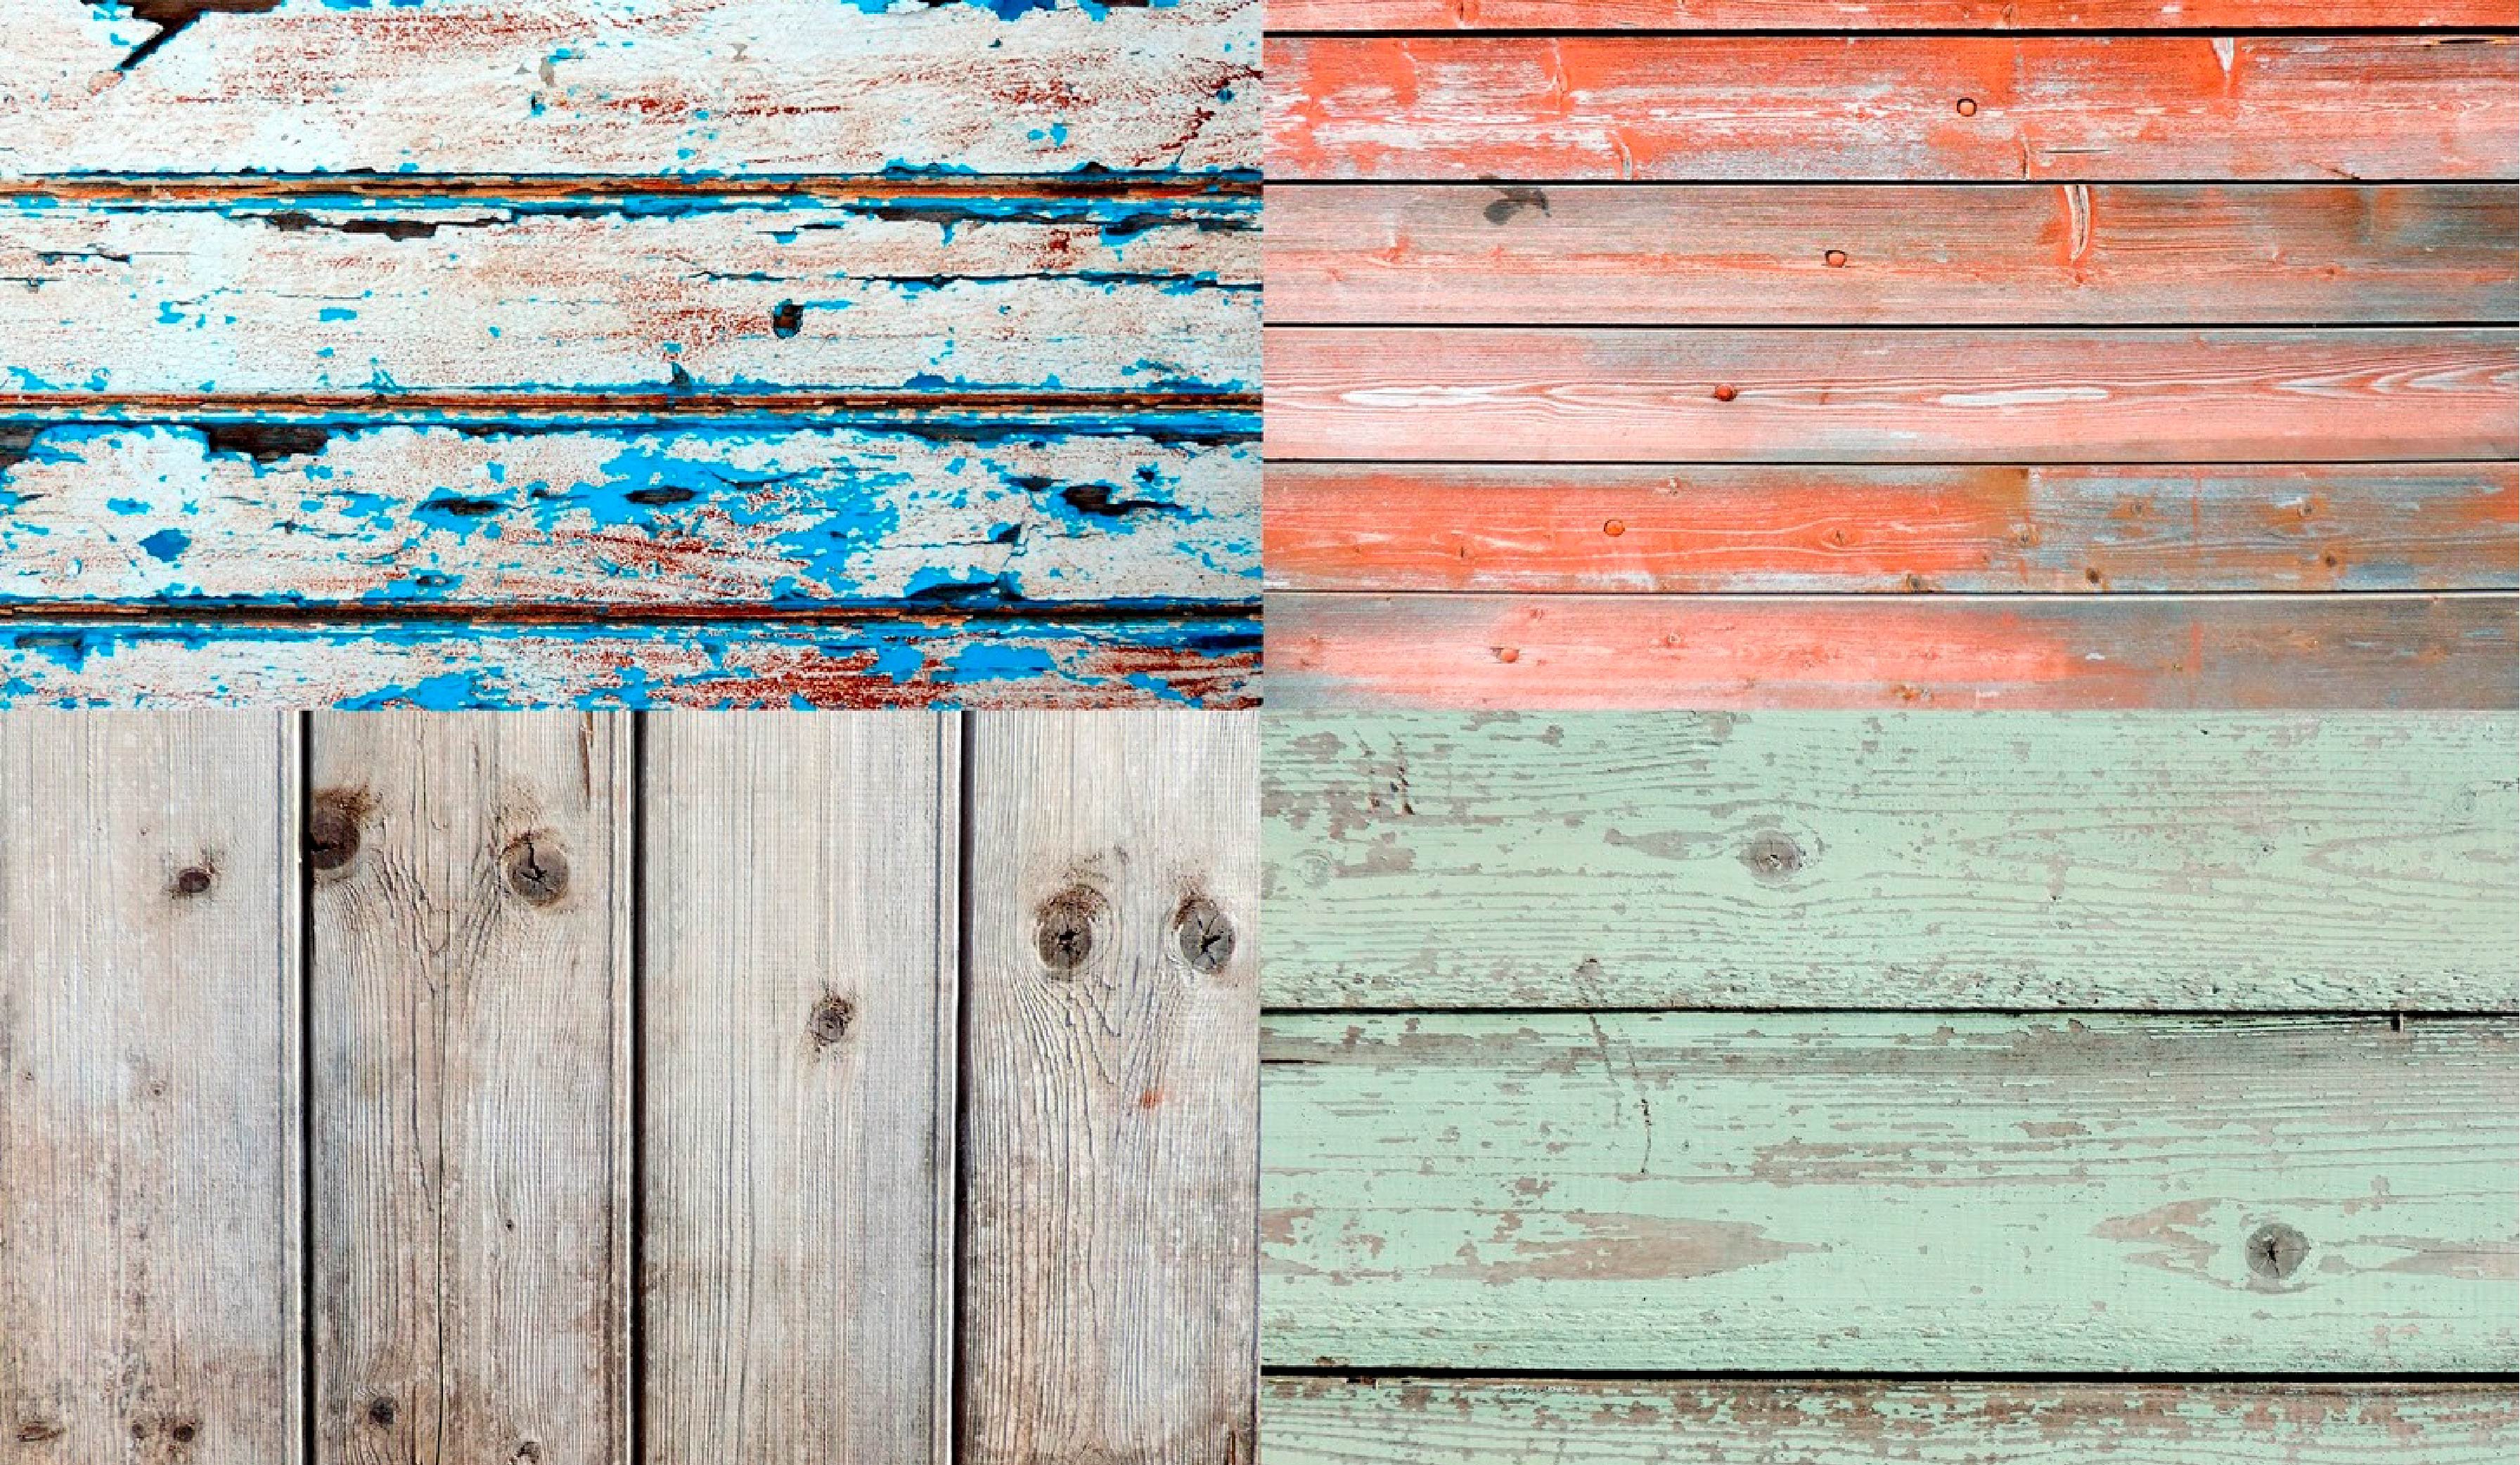 20 Wood Texture Backgrounds